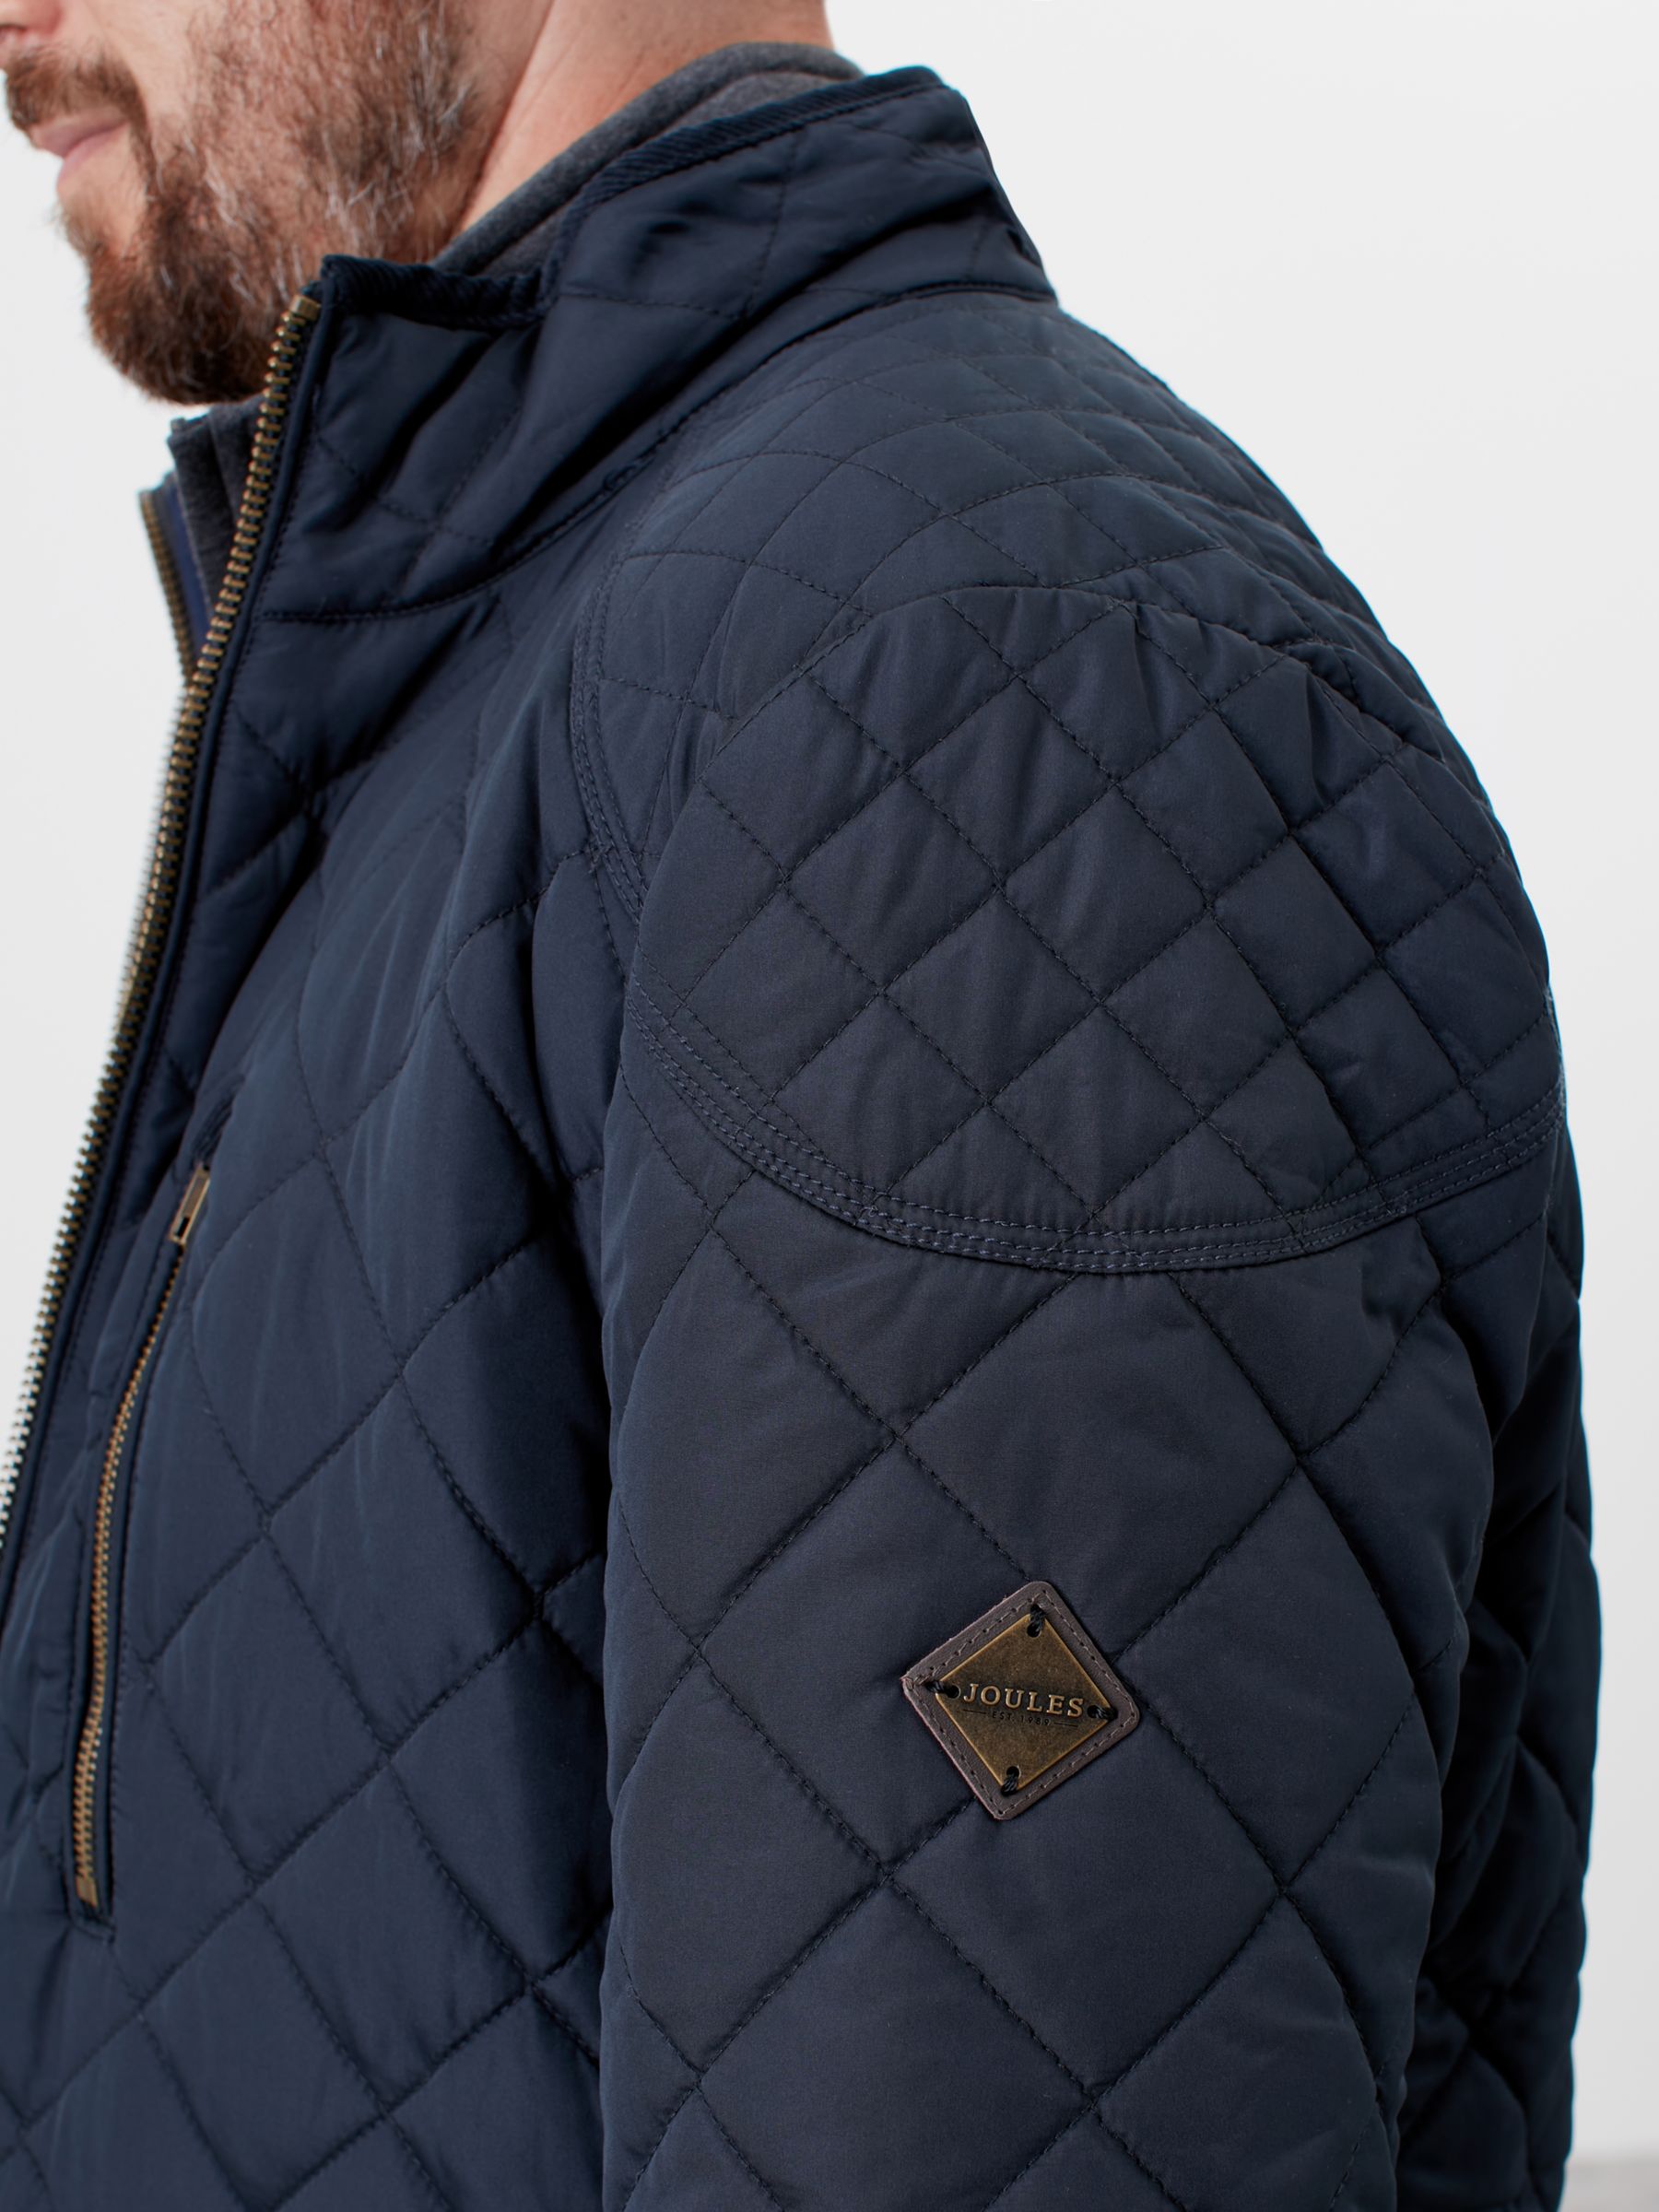 Joules Derwent Quilted Jacket, Marine Navy at John Lewis & Partners